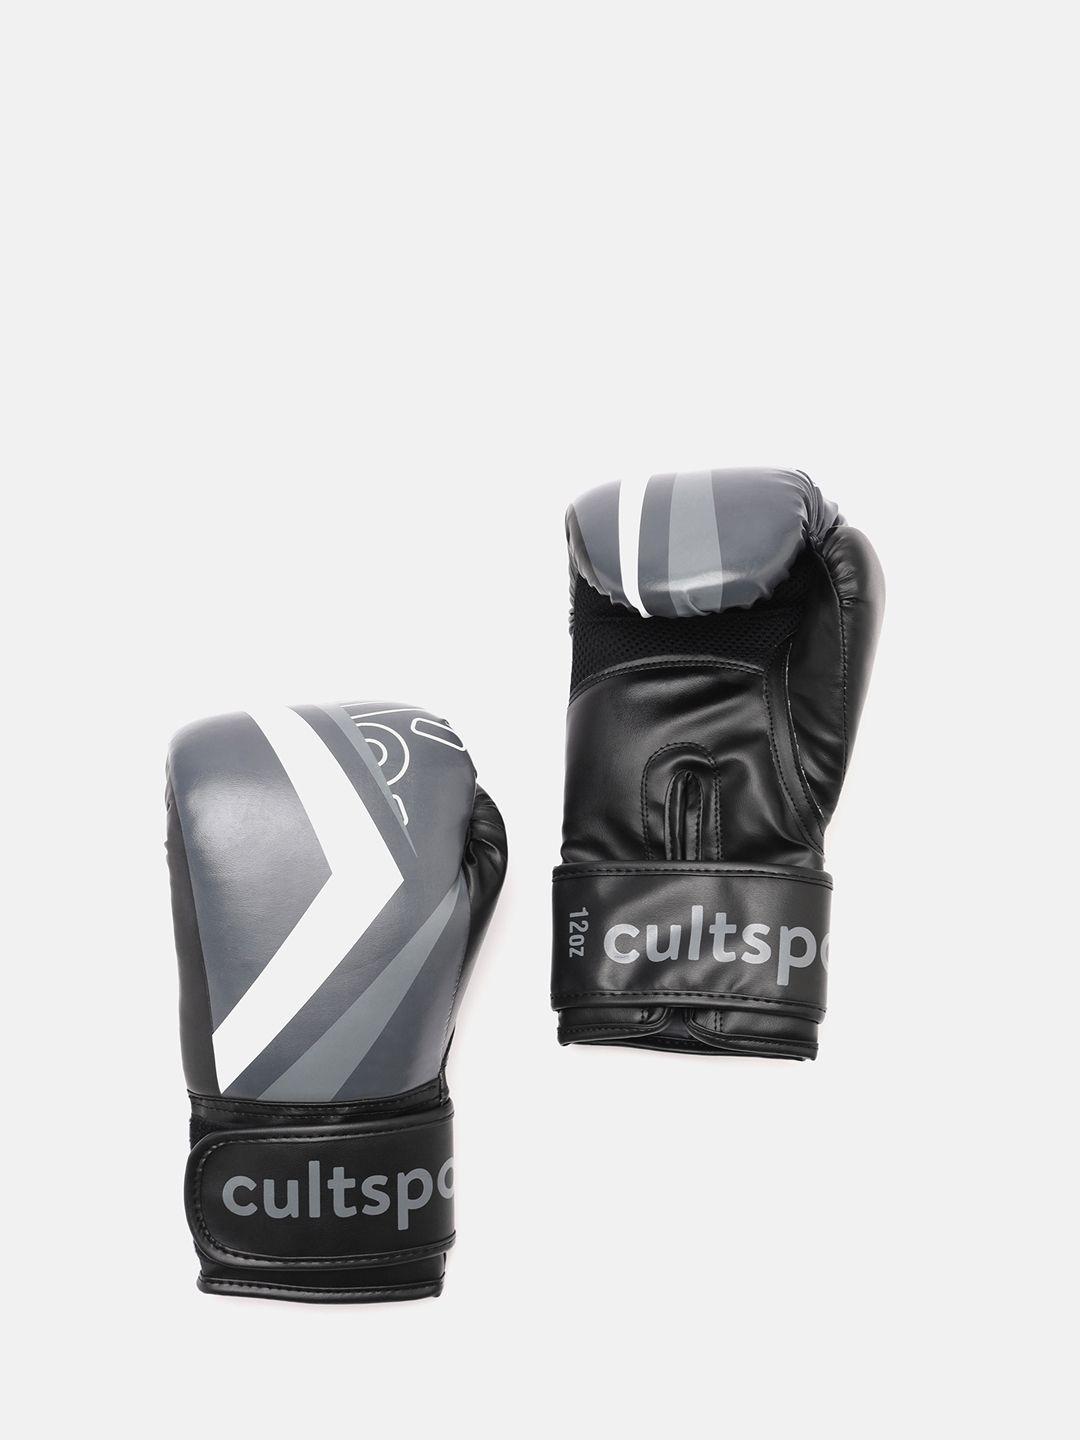 cultsportone printed antimicrobial pro boxing gloves